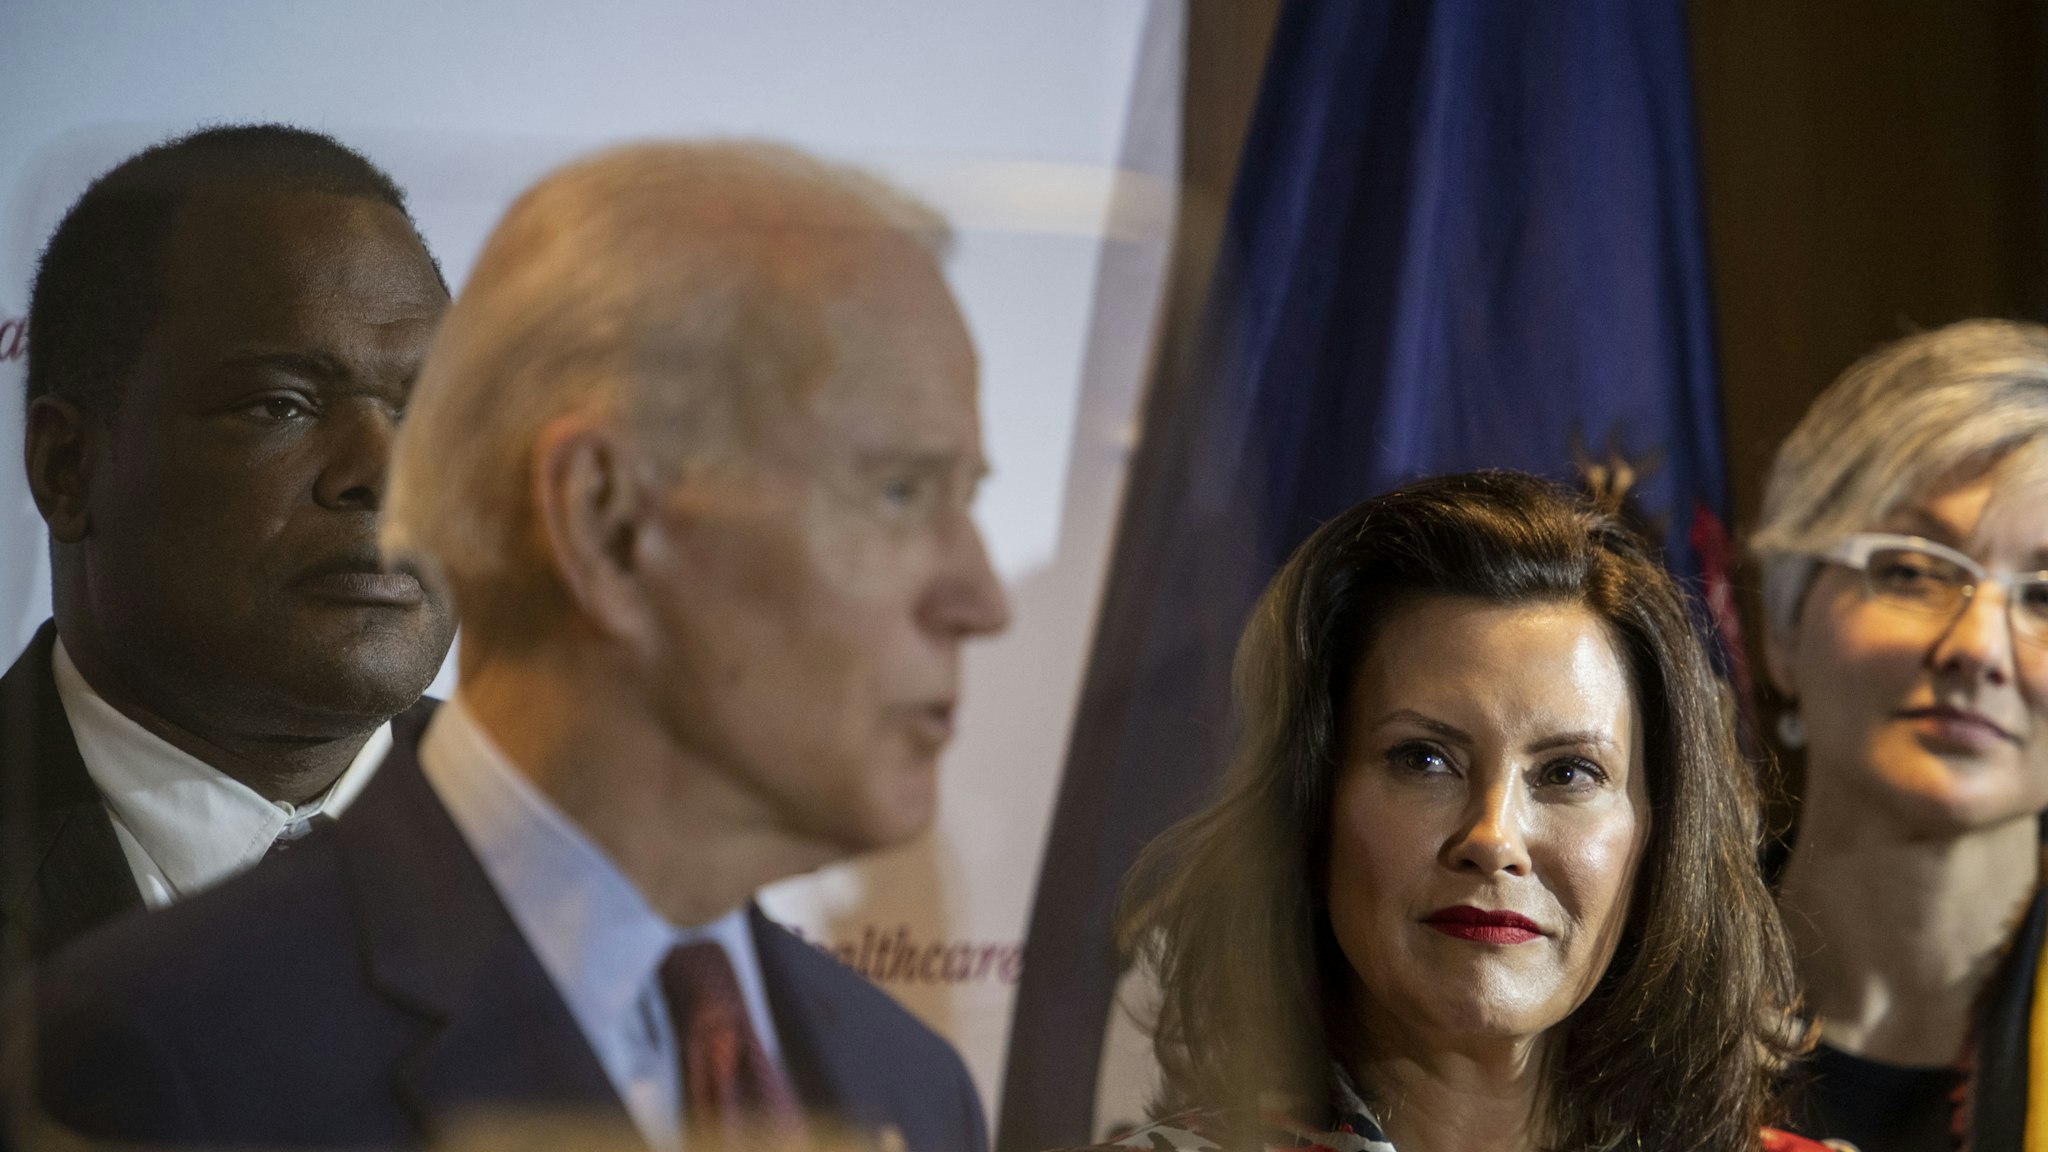 GRAND RAPIDS, MI - MARCH 9: Former Vice President Joe Biden speaks as Michigan Governor Gretchen Whitmer looks on at an event at Cherry Health in Grand Rapids, MI on March 9, 2020. (Photo by Carolyn Van Houten/The Washington Post via Getty Images)